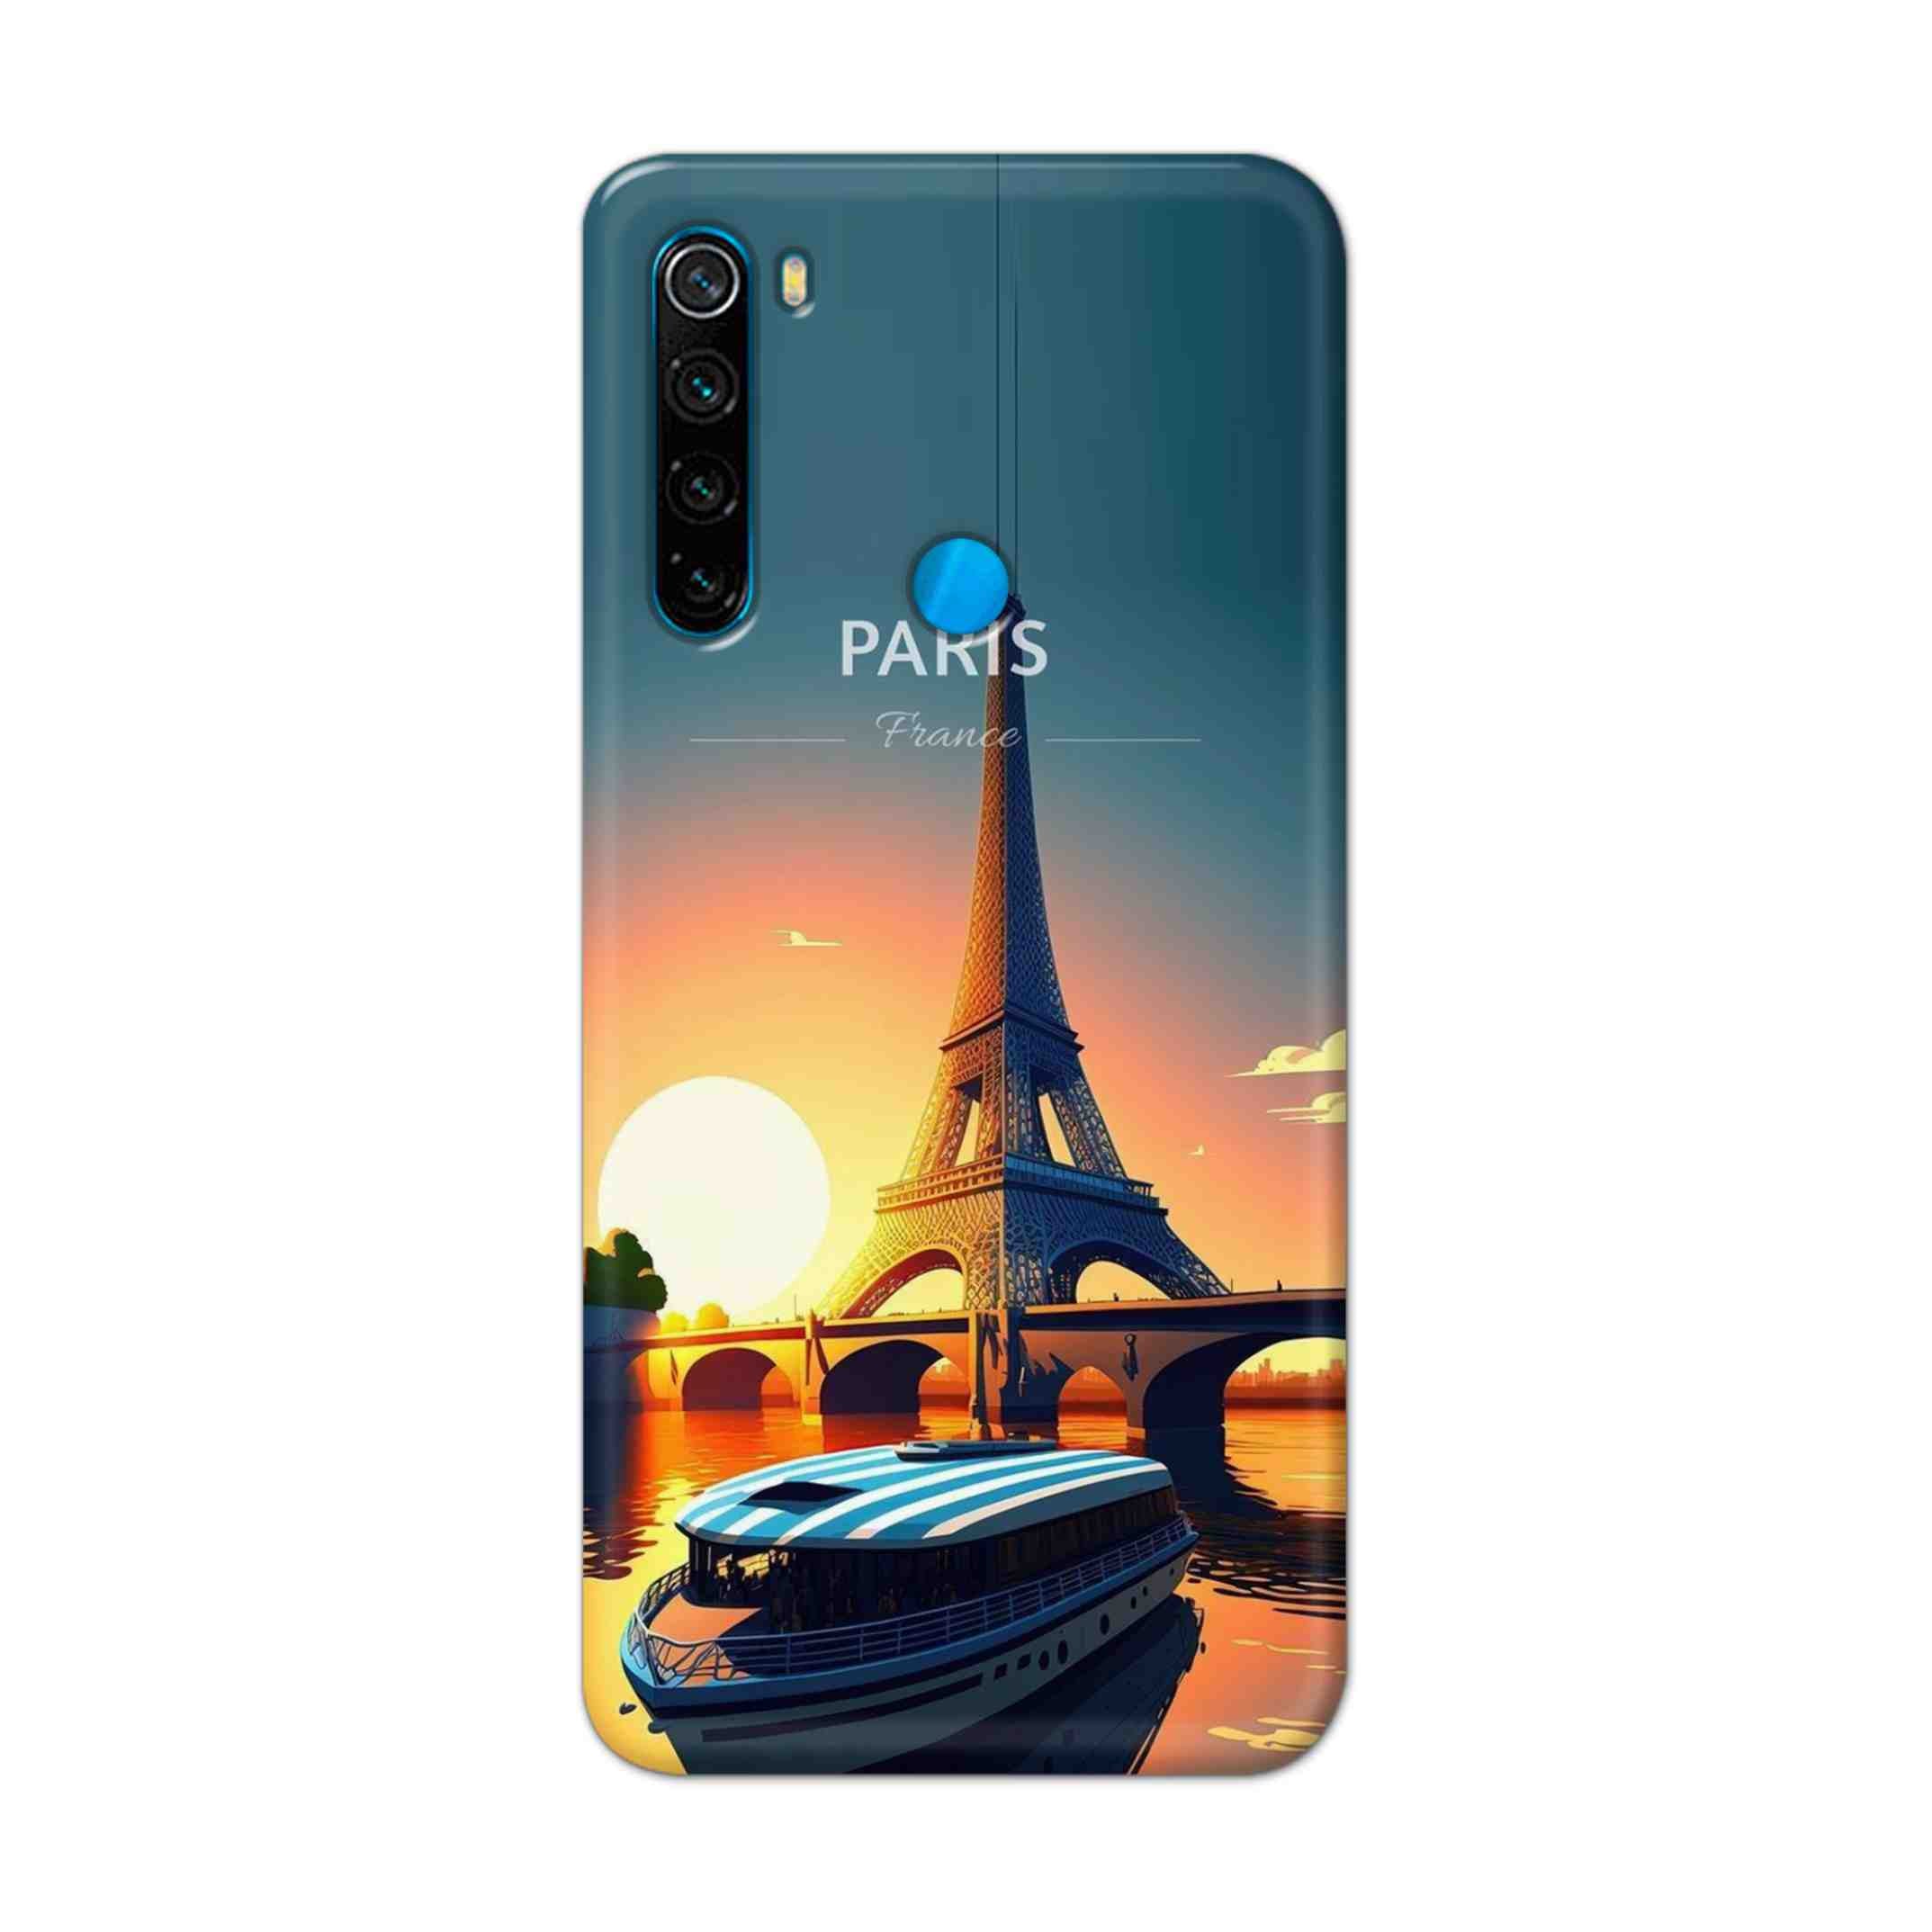 Buy France Hard Back Mobile Phone Case Cover For Xiaomi Redmi Note 8 Online